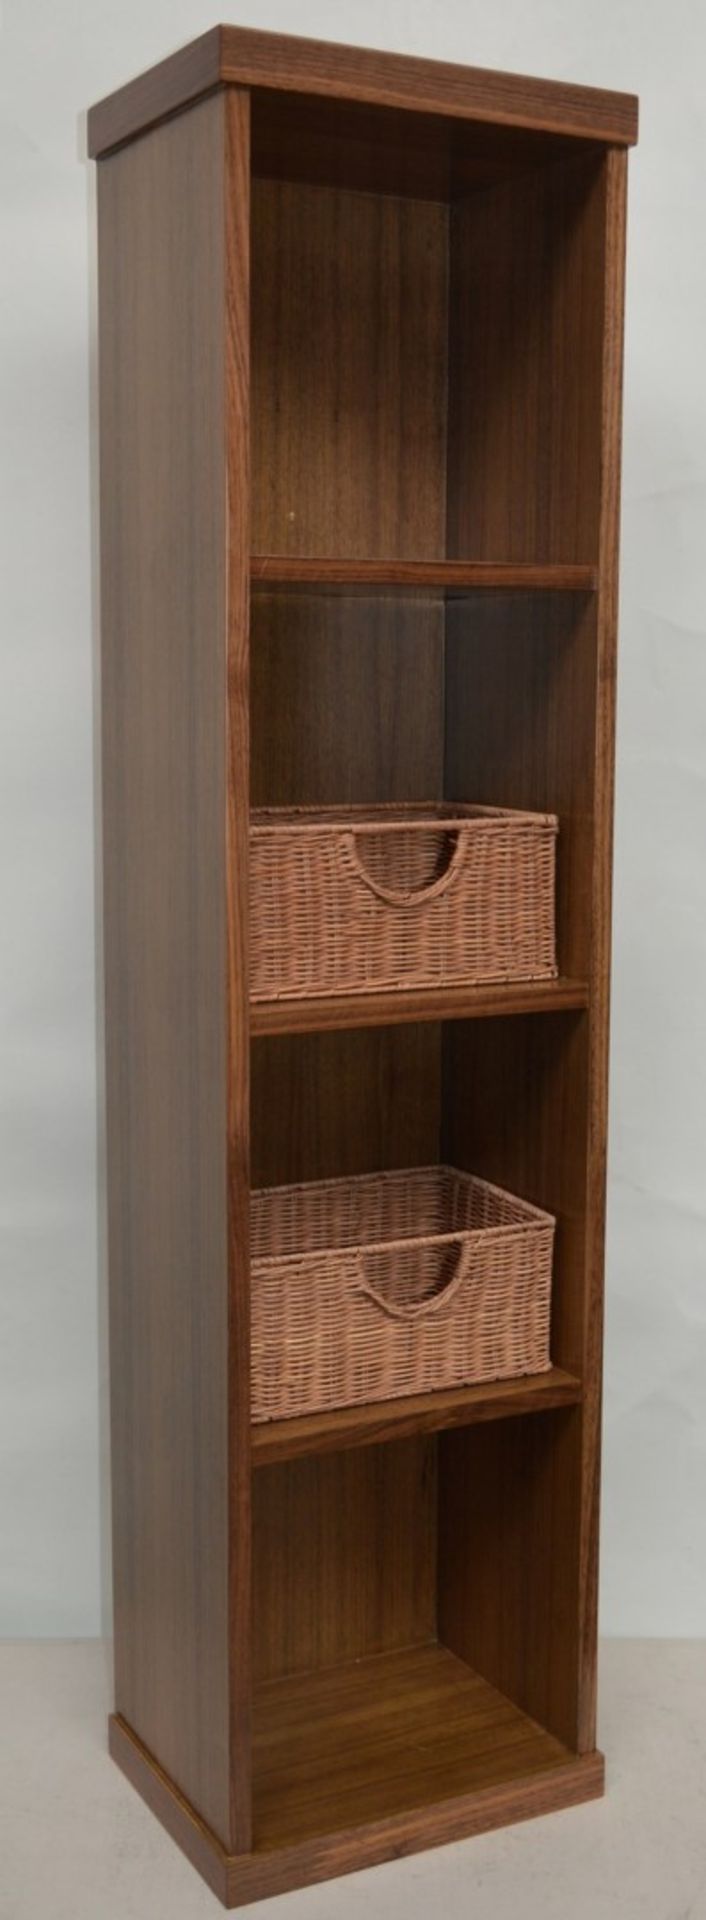 1 x Vogue ARC Series 2 Bathroom Storage Shelving Unit - Wall Mounted or Floor Standing - WALNUT - Image 2 of 9